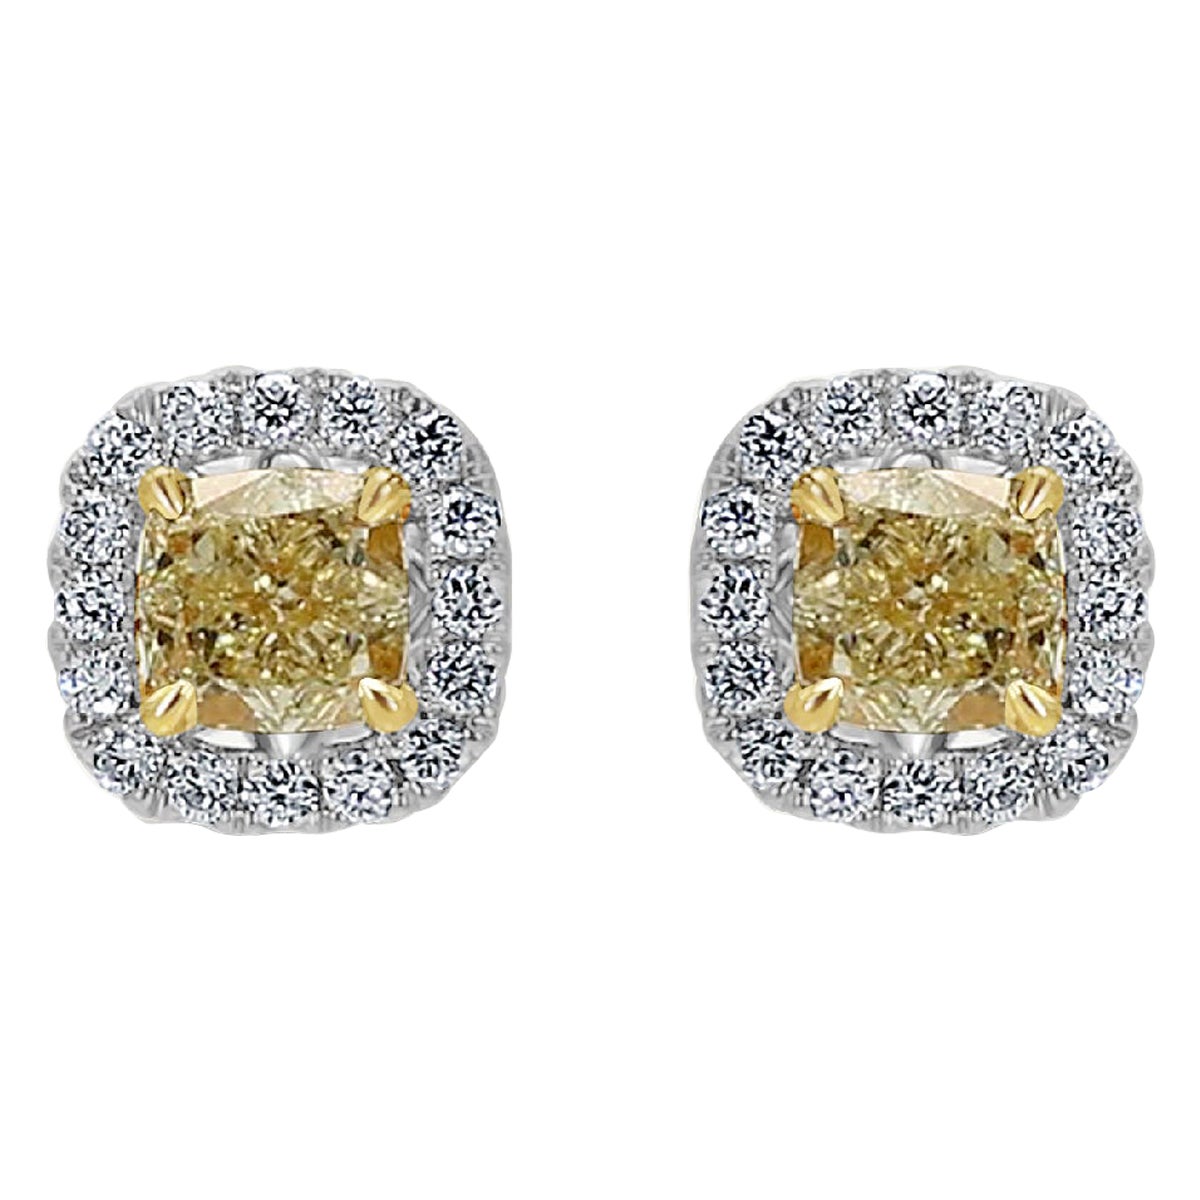 Natural Yellow Cushions and White Diamond 1.70 Carat TW Gold Stud Earrings